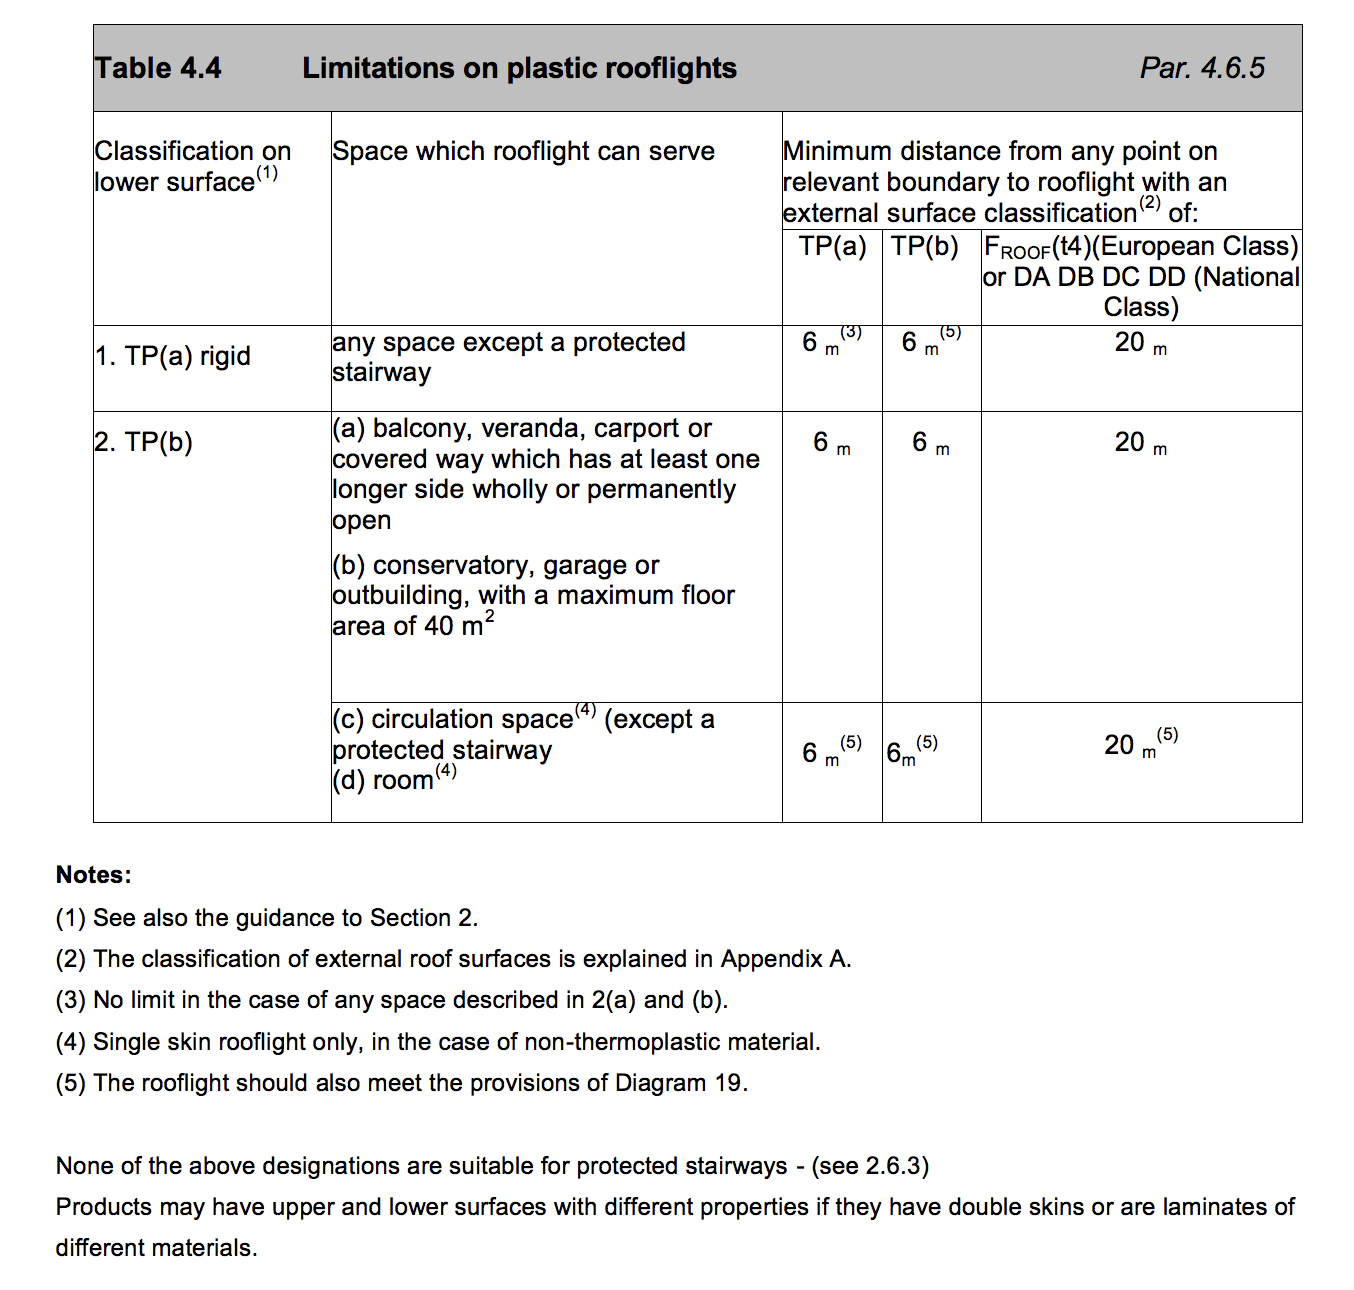 Table HB7 - Limitations on plastic rooflights - Extract from TGD B Vol. 2